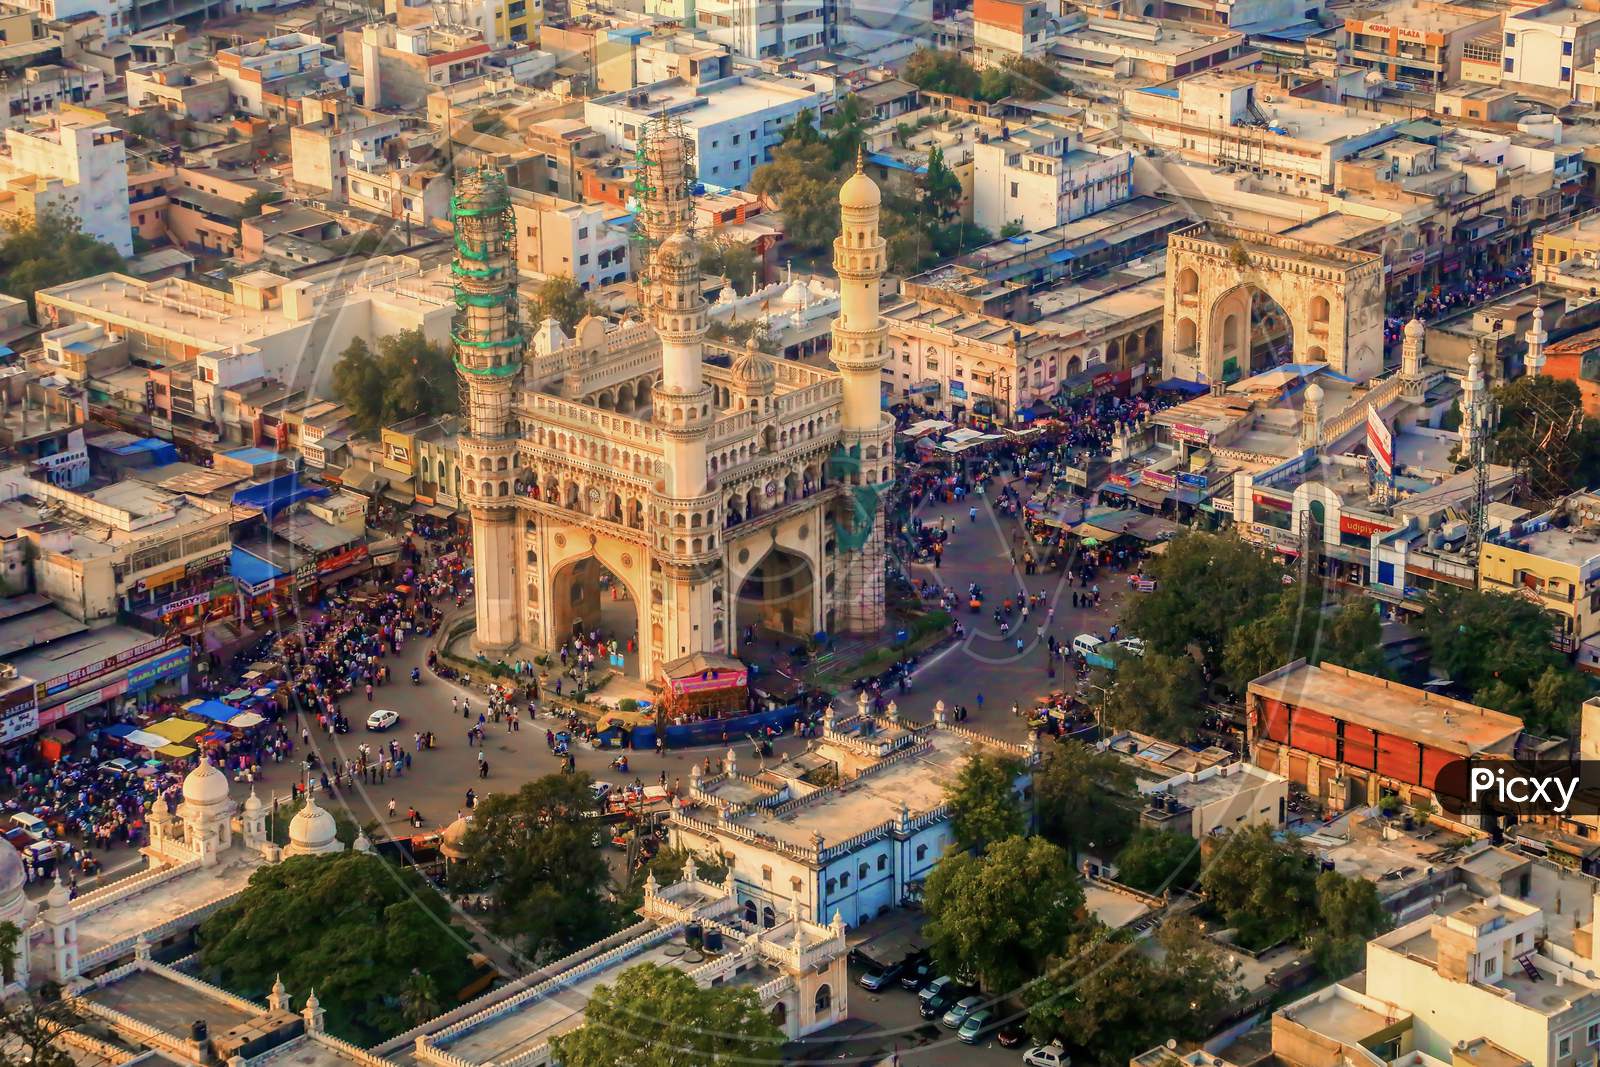 India Charminar, Hyderabad, Telangana. The Most Prominent Landmark Located Right In The Heart Of Hyderabad Is A Four-Sided Archway With Four Soaring Minarets